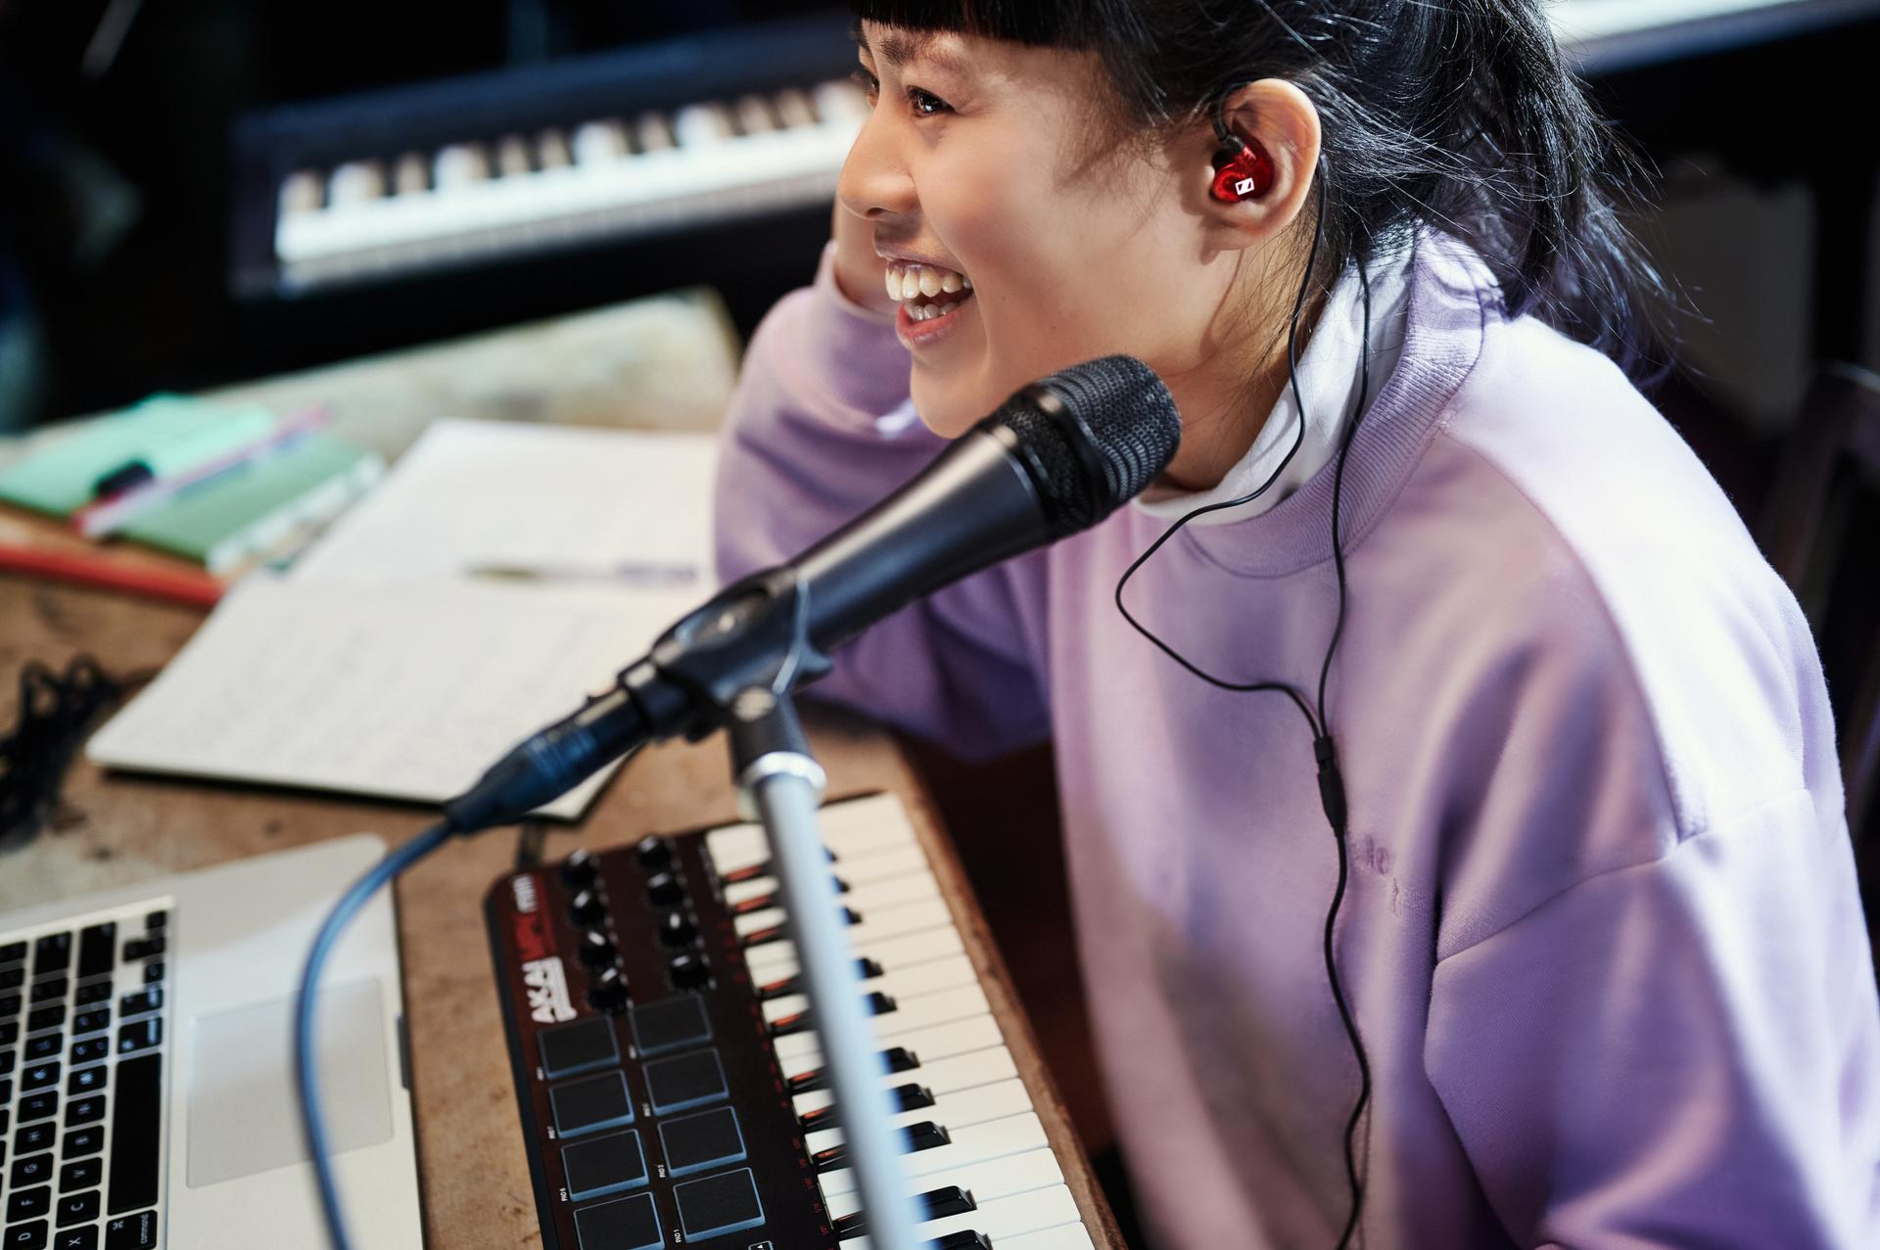 Asian woman sitting smiling in a music studio in front of her equipment